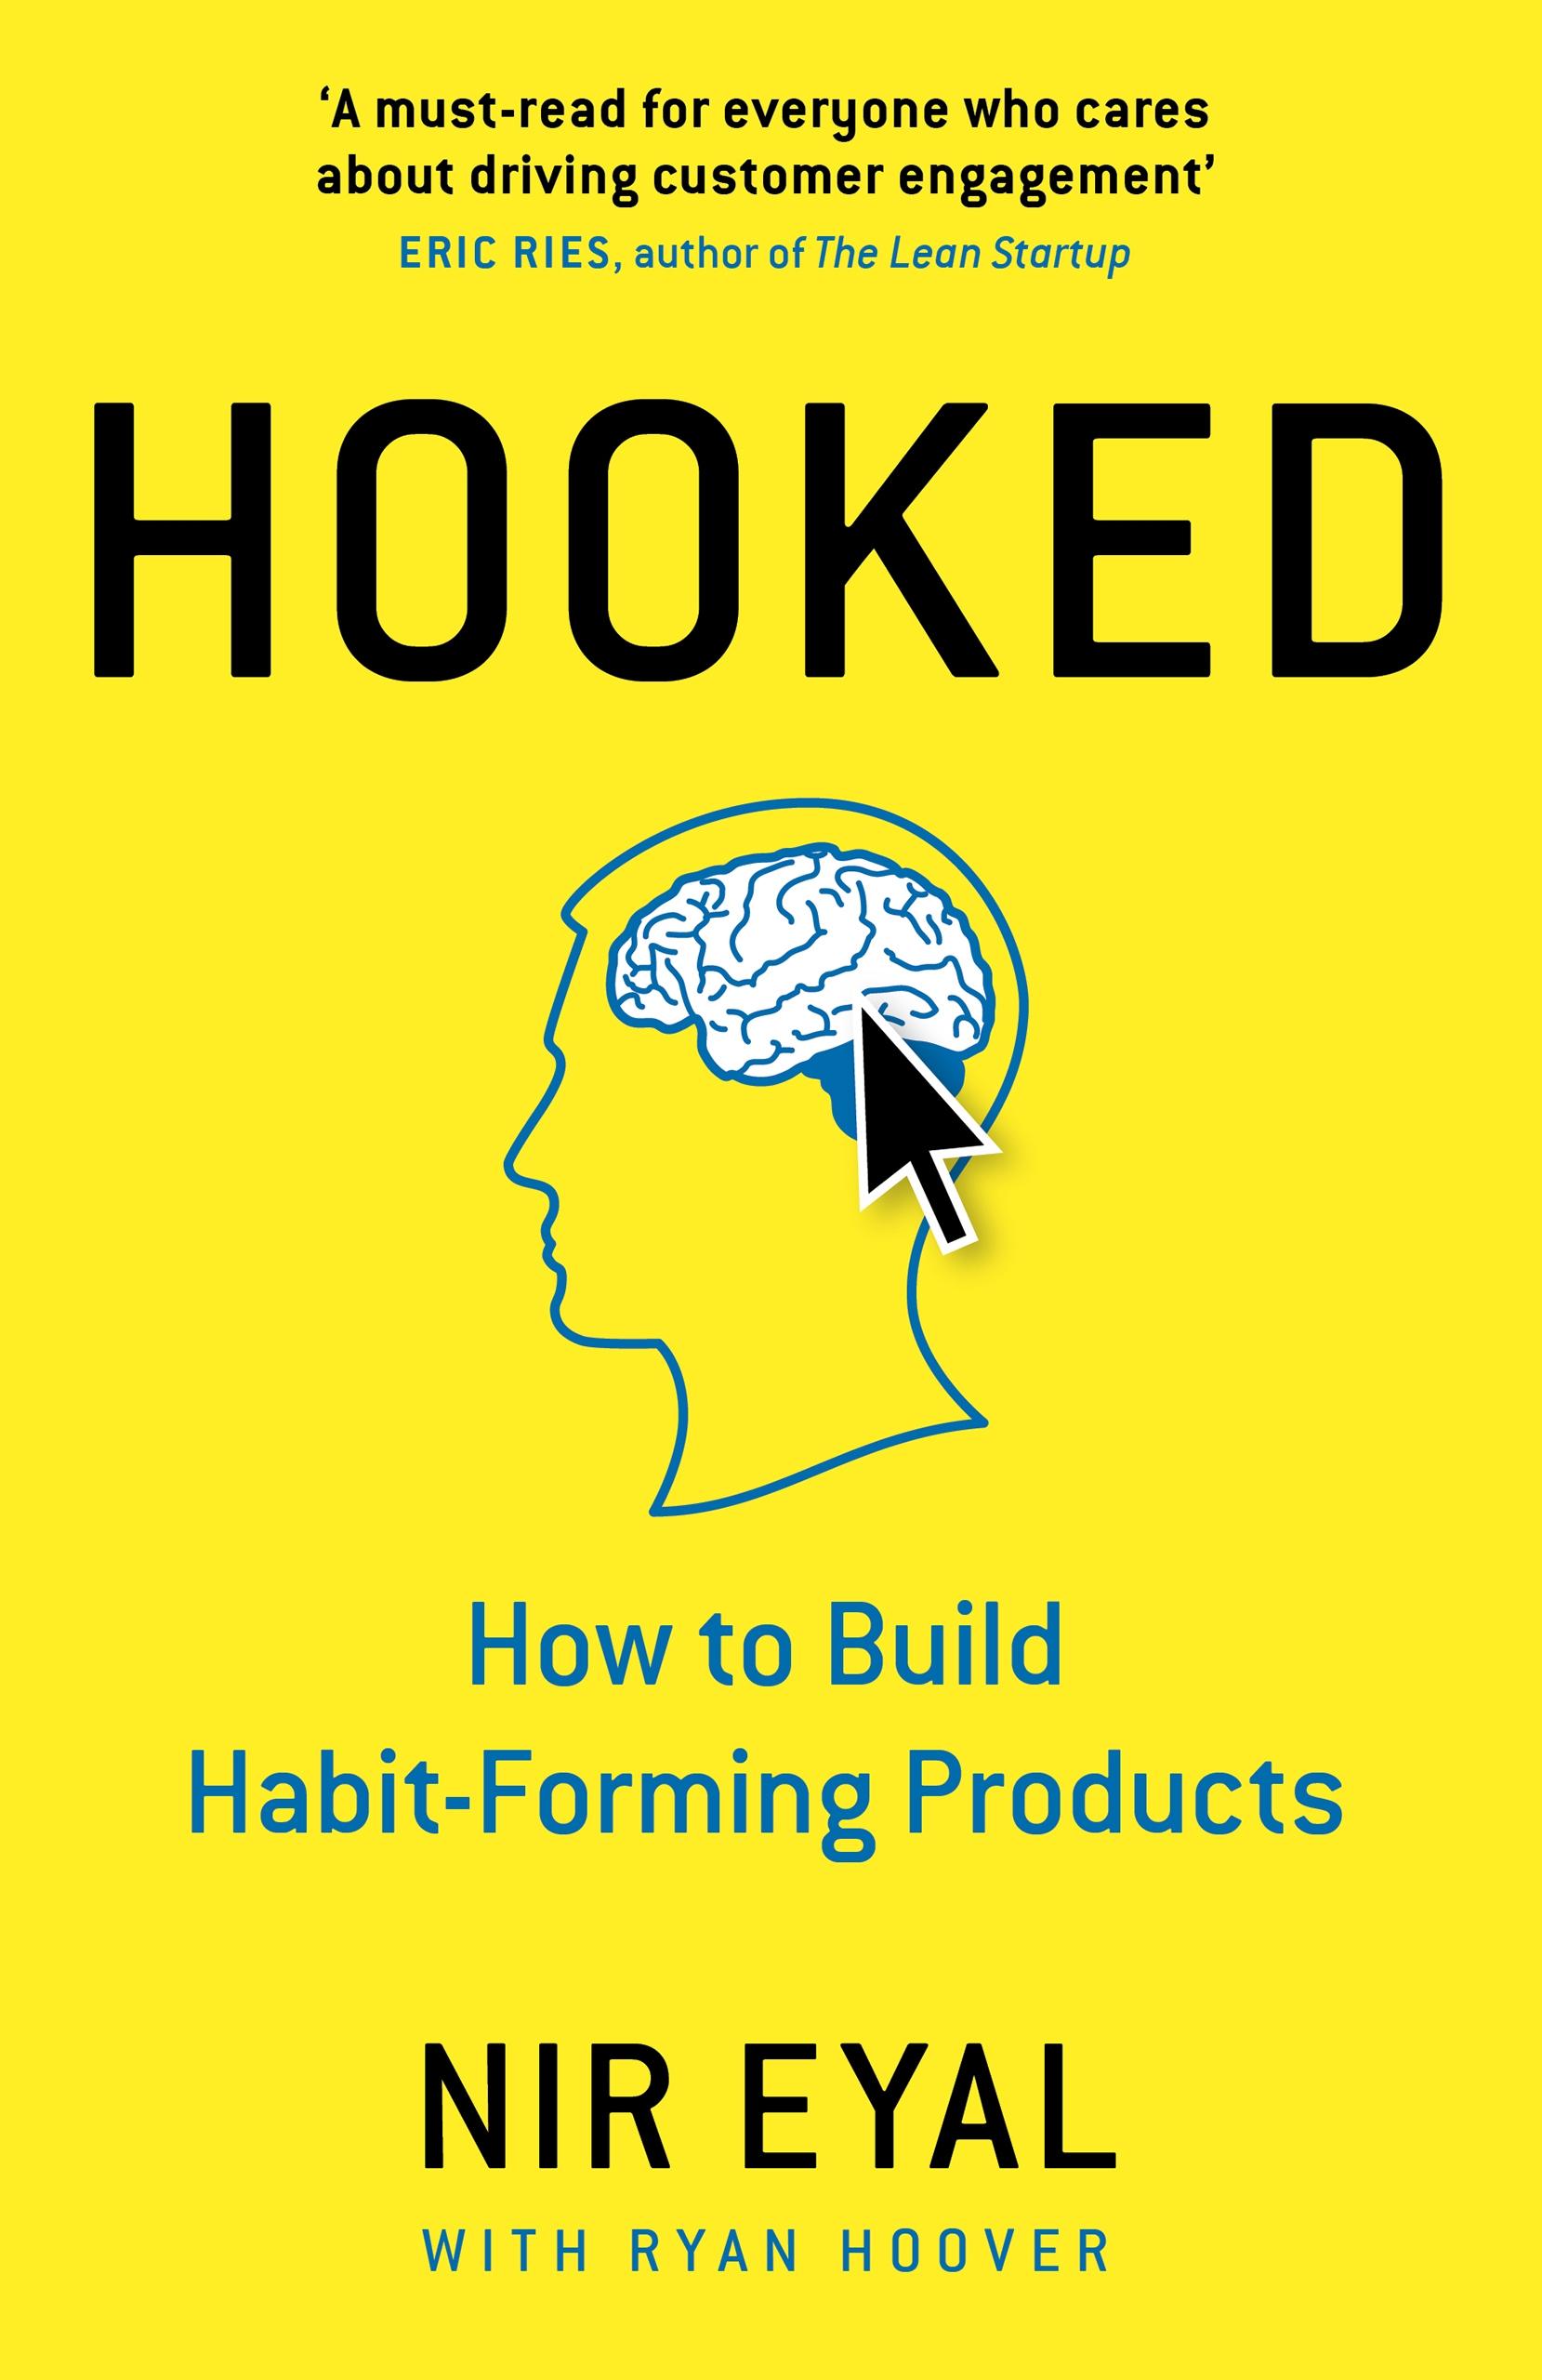 Hooked / How to Build Habit-Forming Products / Nir Eyal / Buch / 242 S. / Englisch / 2014 / Penguin Books Ltd (UK) / EAN 9780241184837 - Eyal, Nir